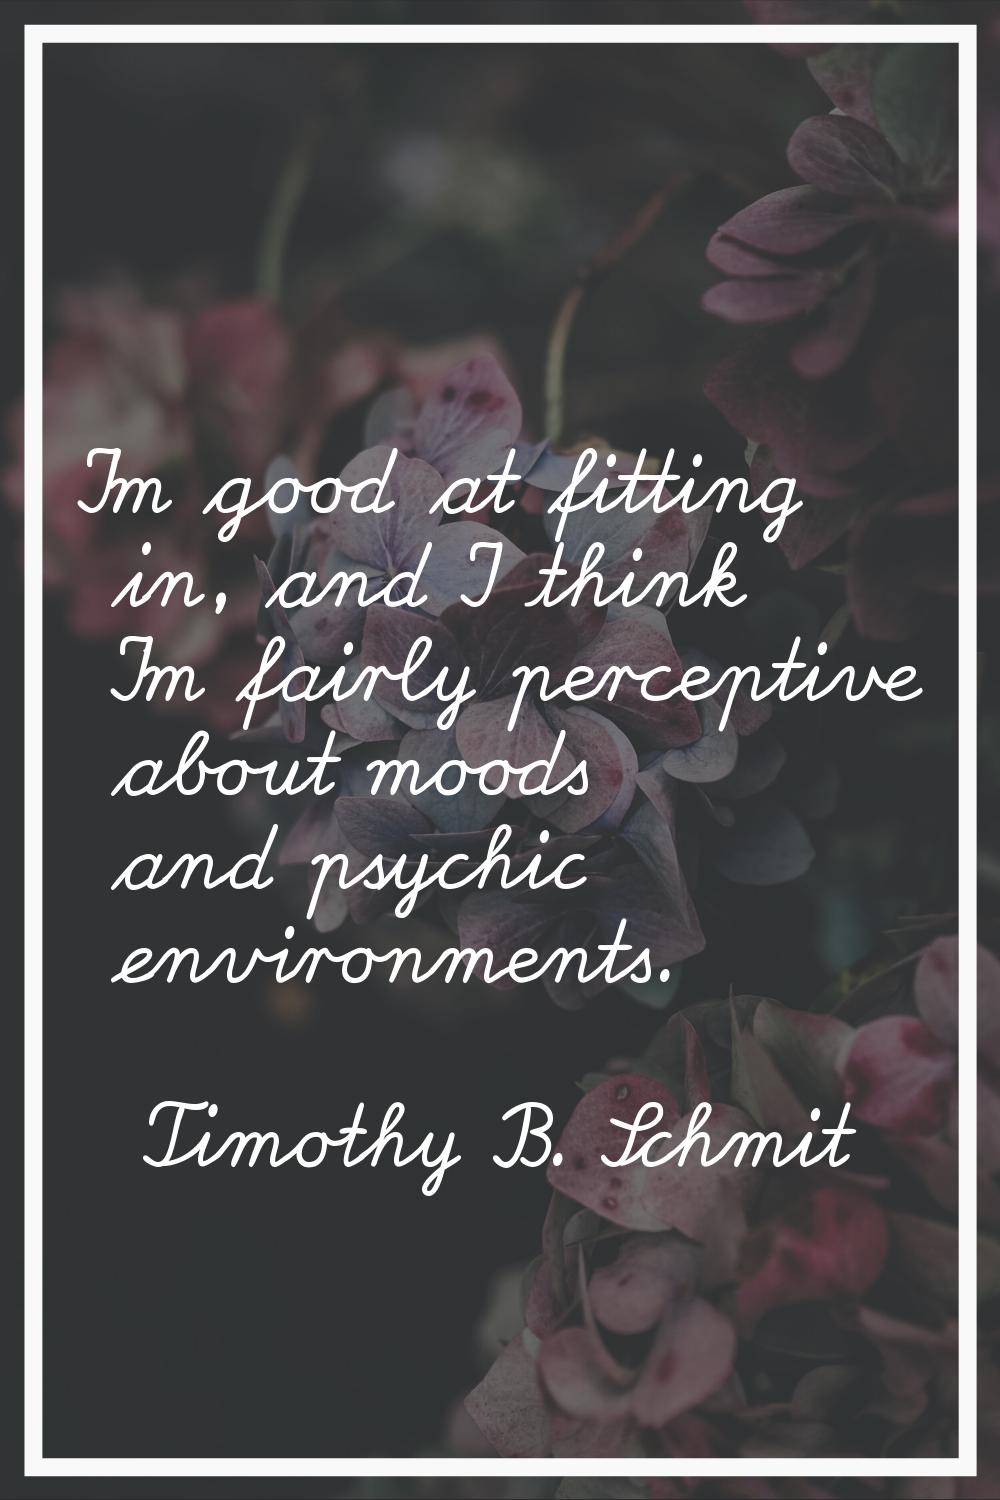 I'm good at fitting in, and I think I'm fairly perceptive about moods and psychic environments.